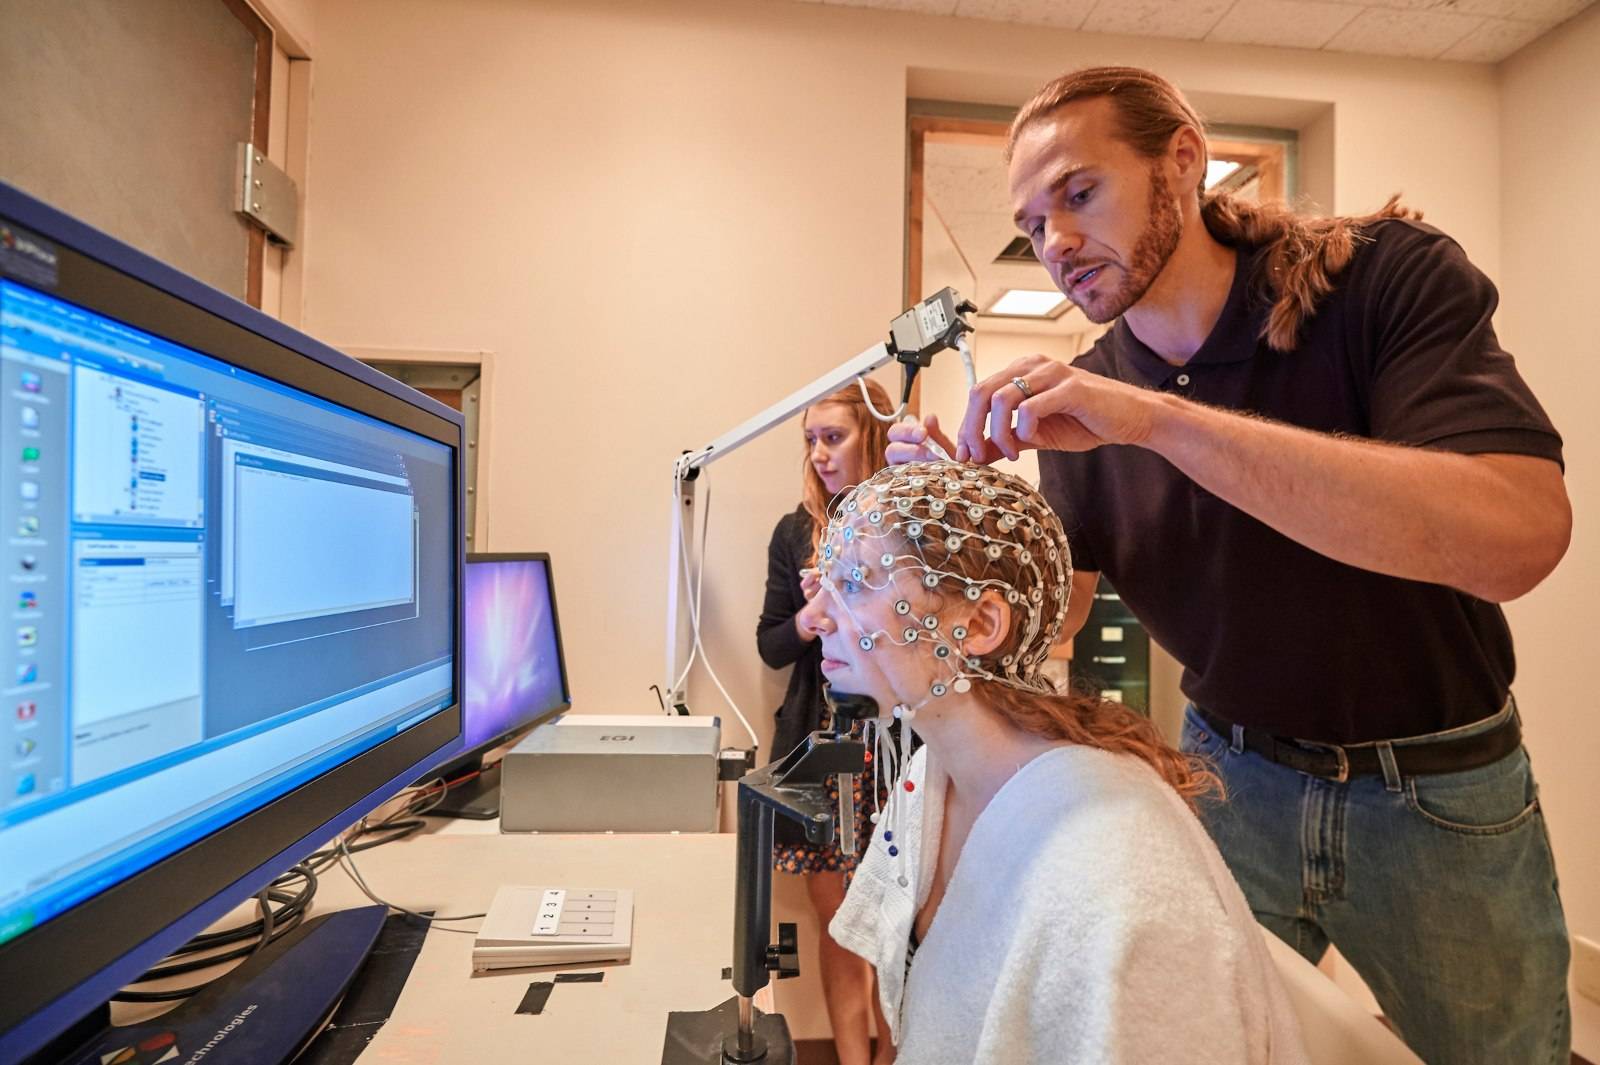 Professor Bruce Hansen places a research set device over a students head